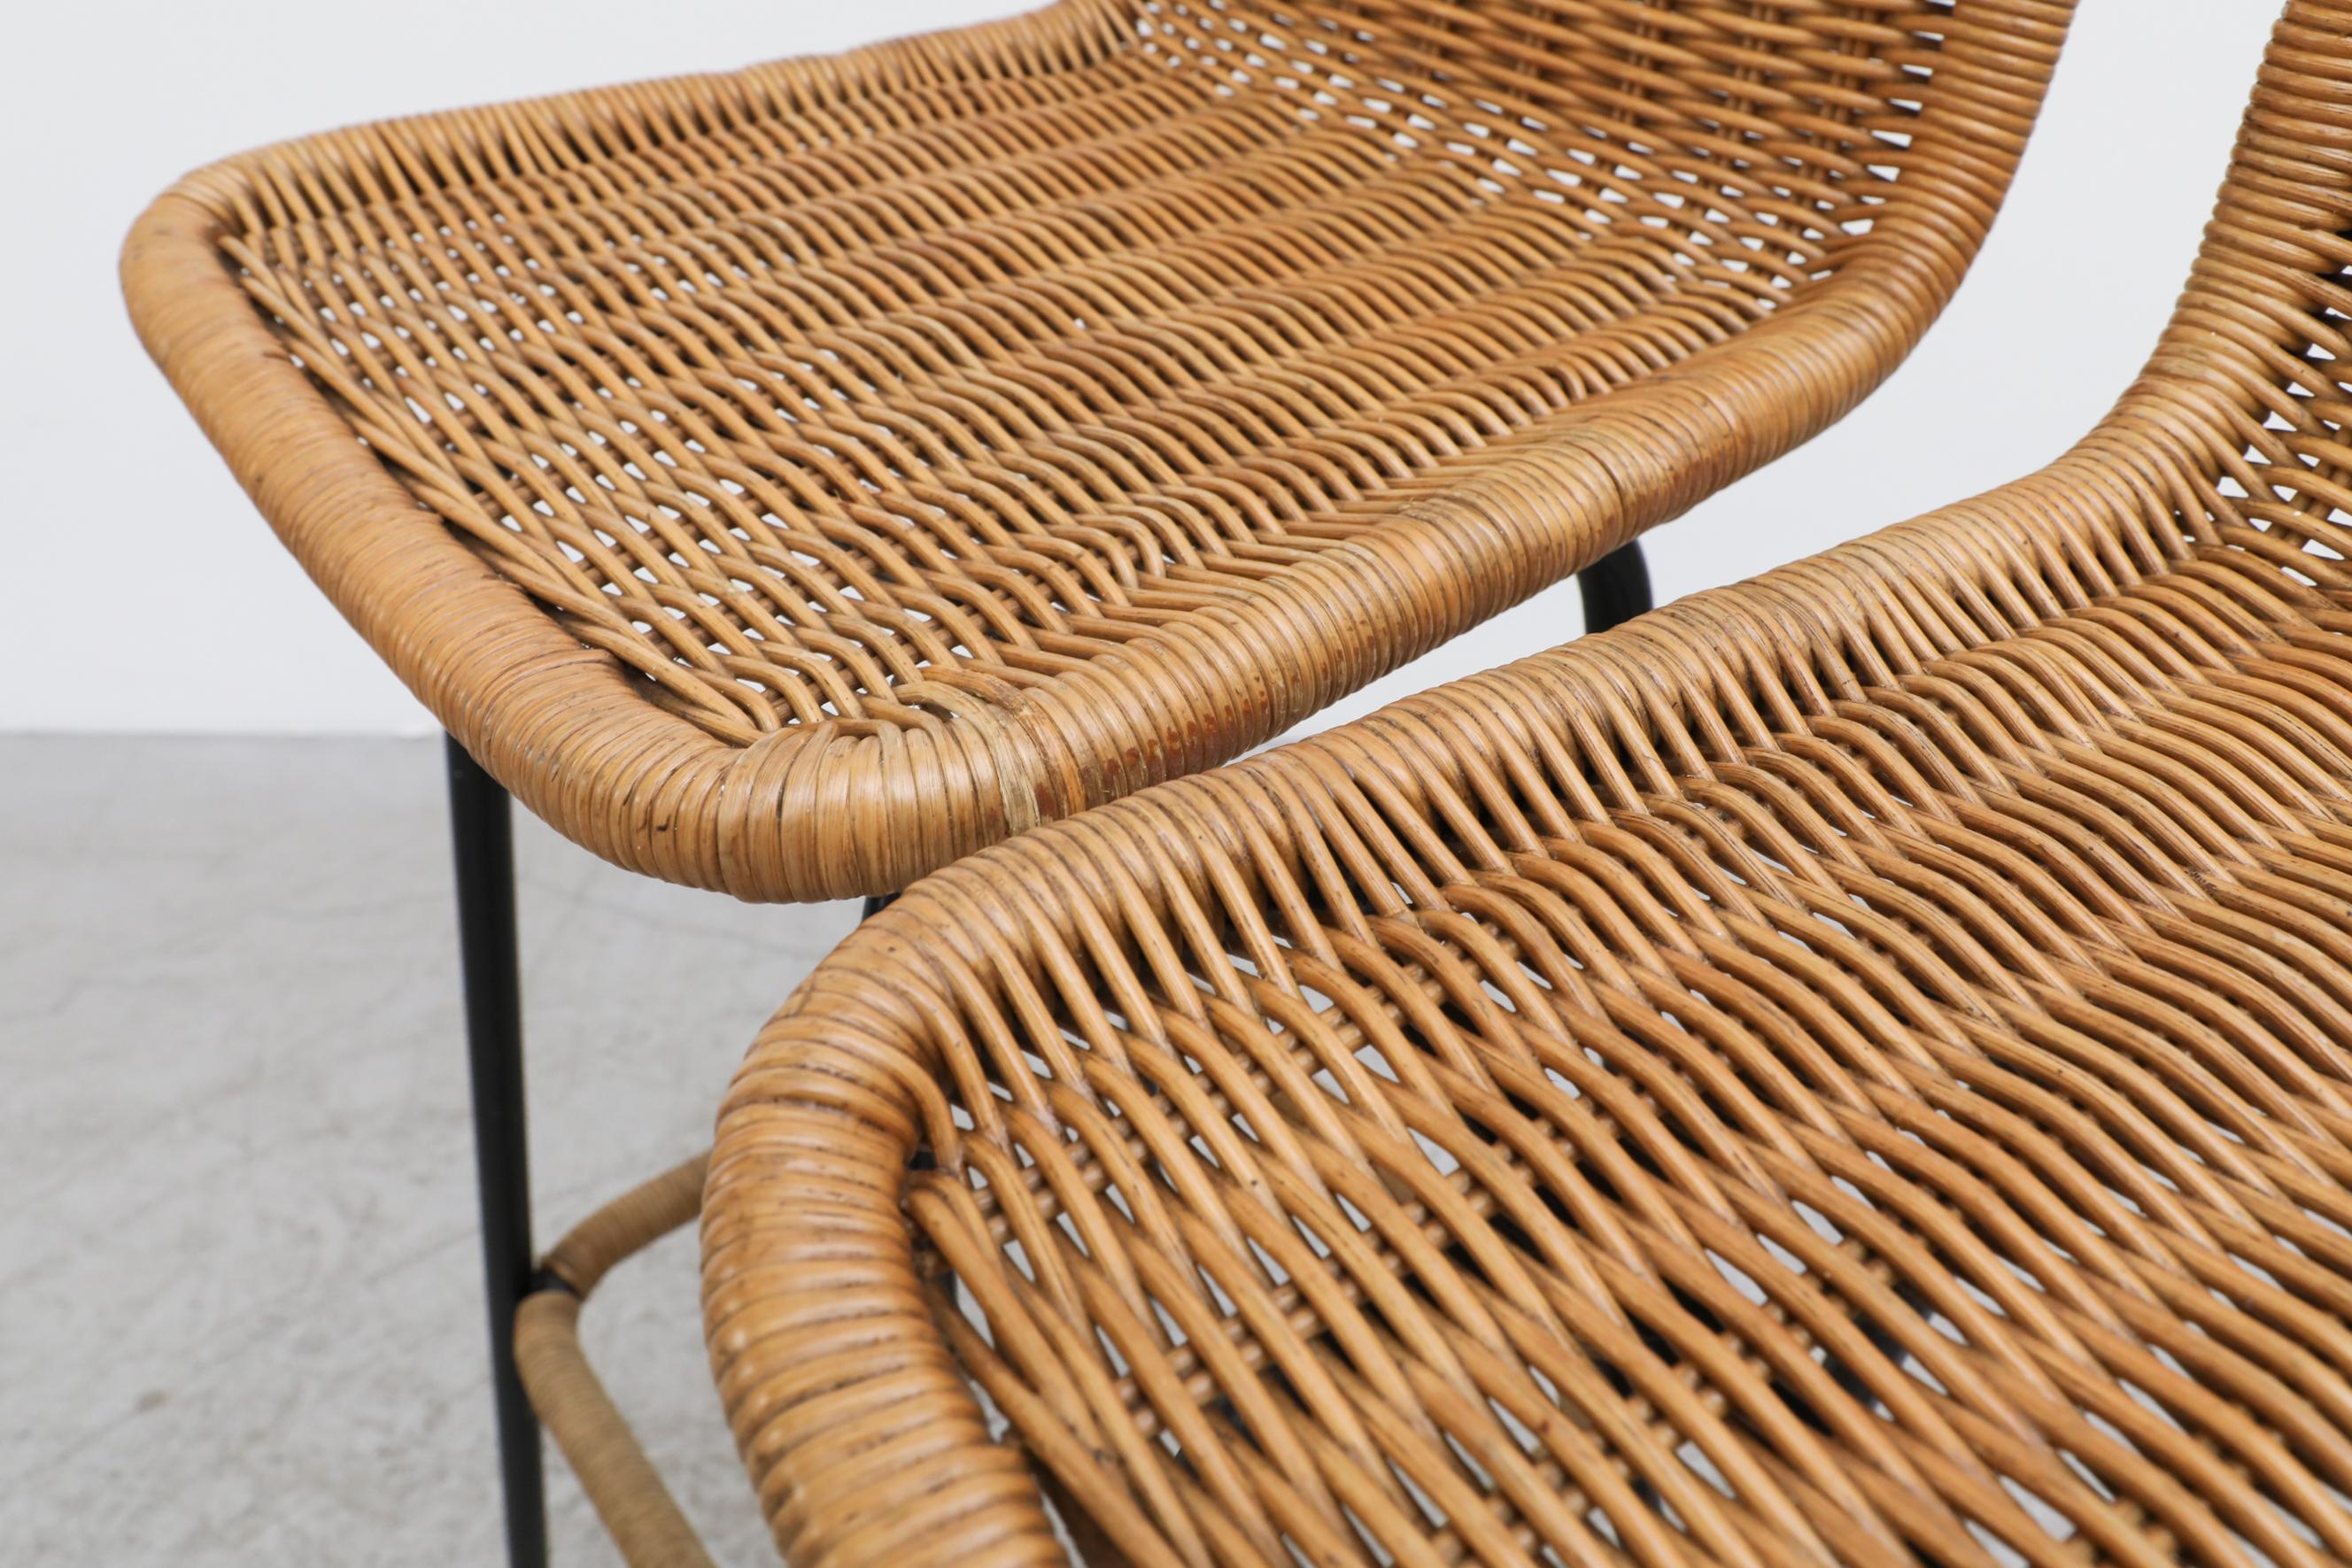 Dutch Set of 4 Charlotte Perriand Style Wicker Bar Stools with Rattan Footrest